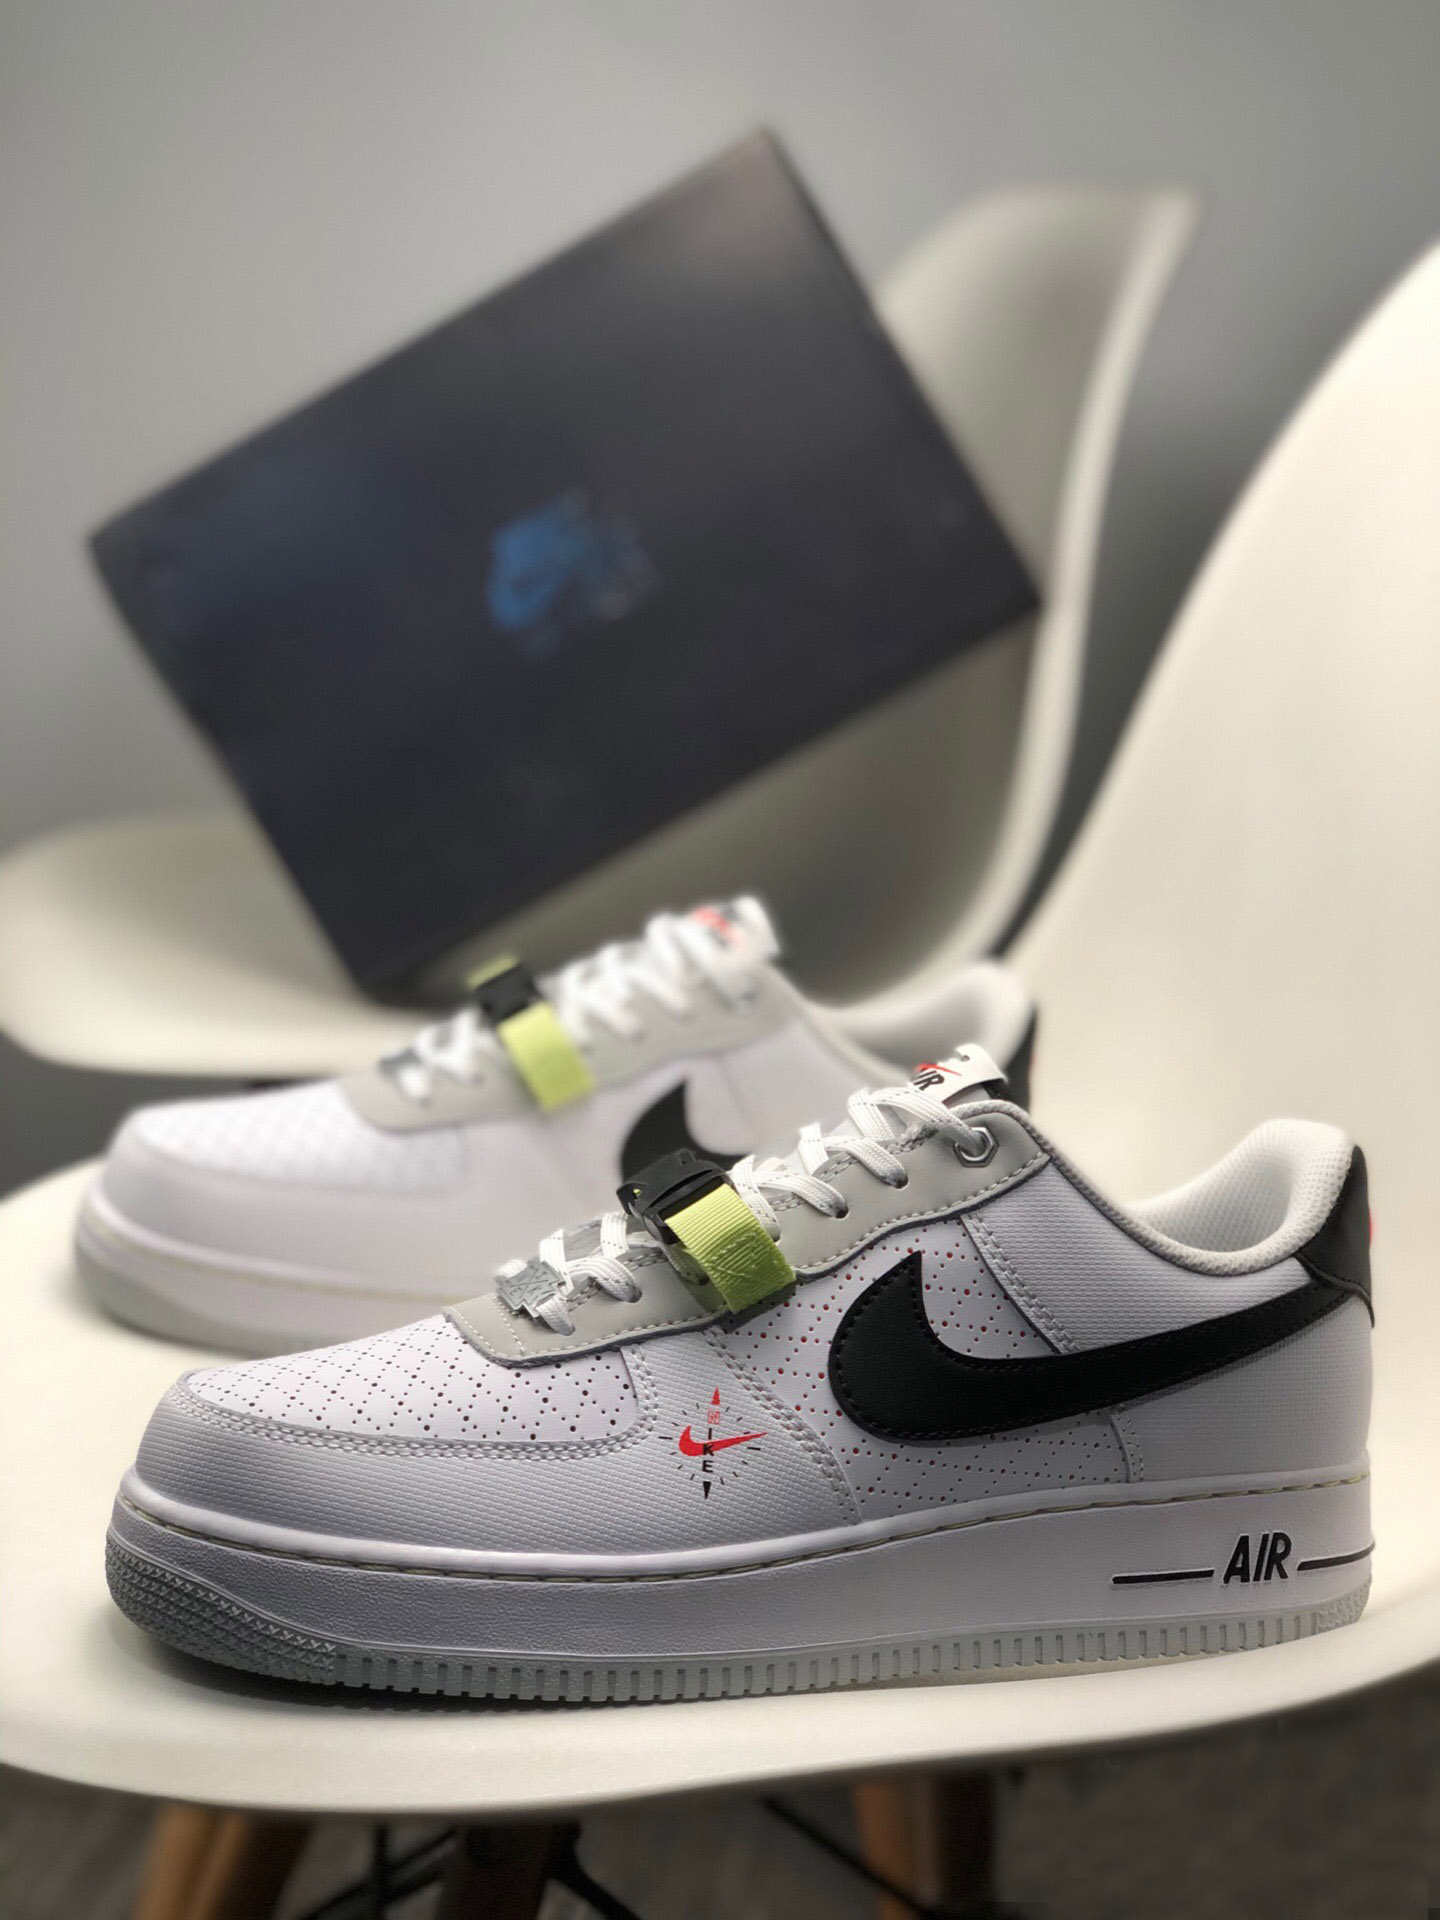 Nike Air AF Force 1 Low "Fresh Perspective" DC2526-100 Shoes